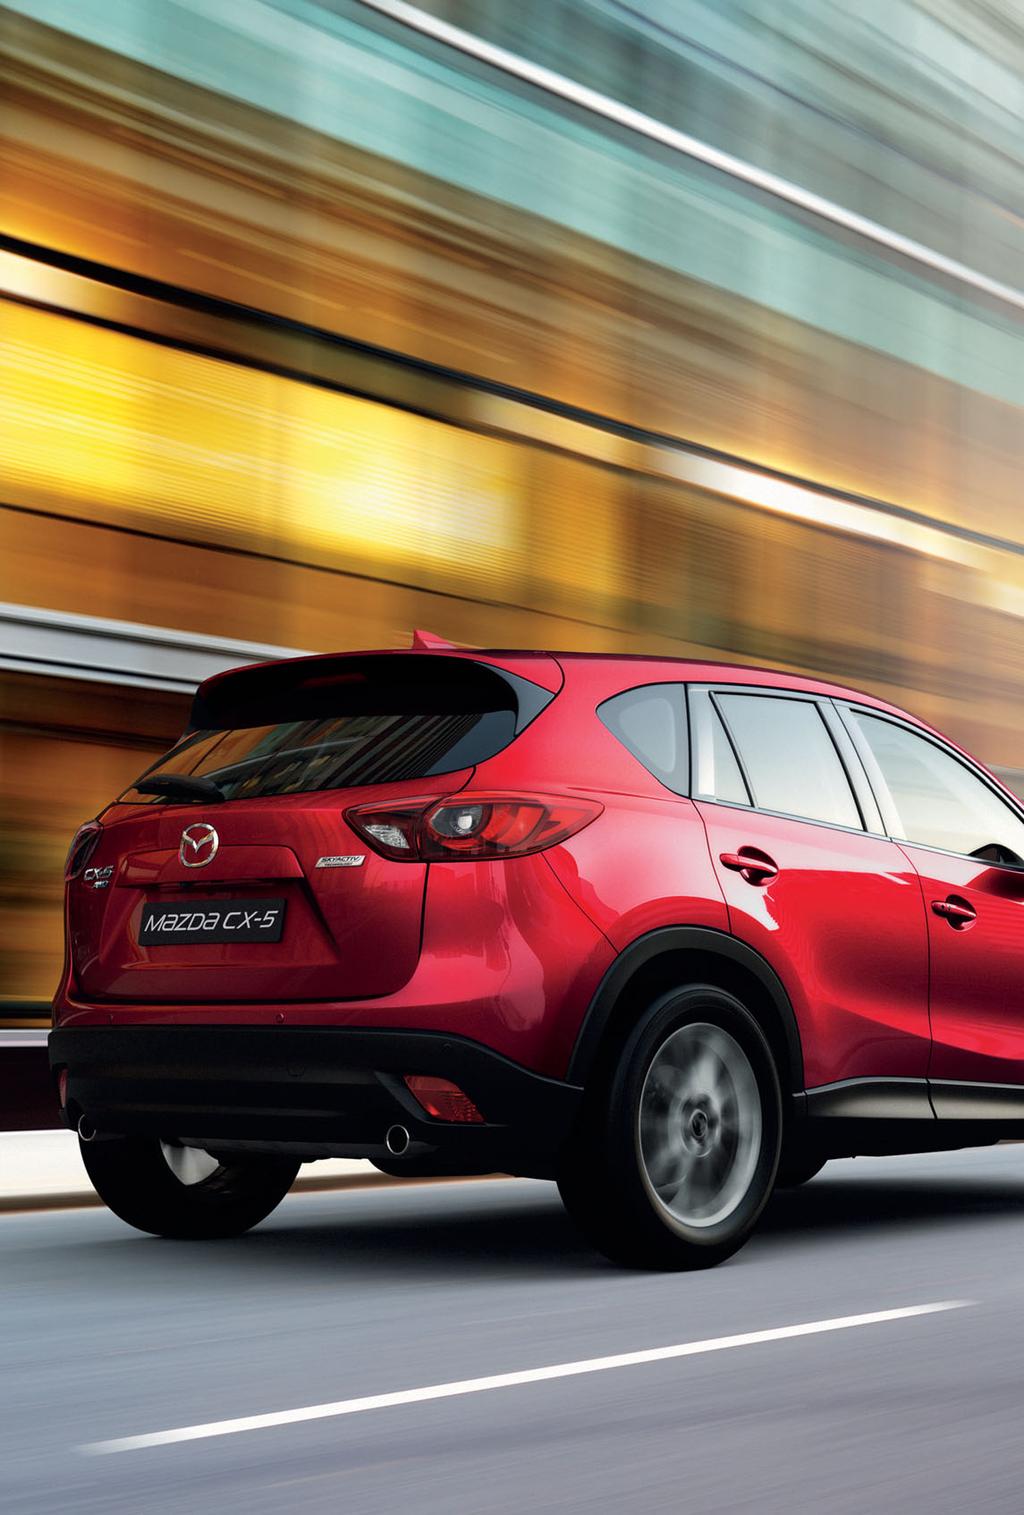 The CX-5 comes highly equipped for comfort and performance.